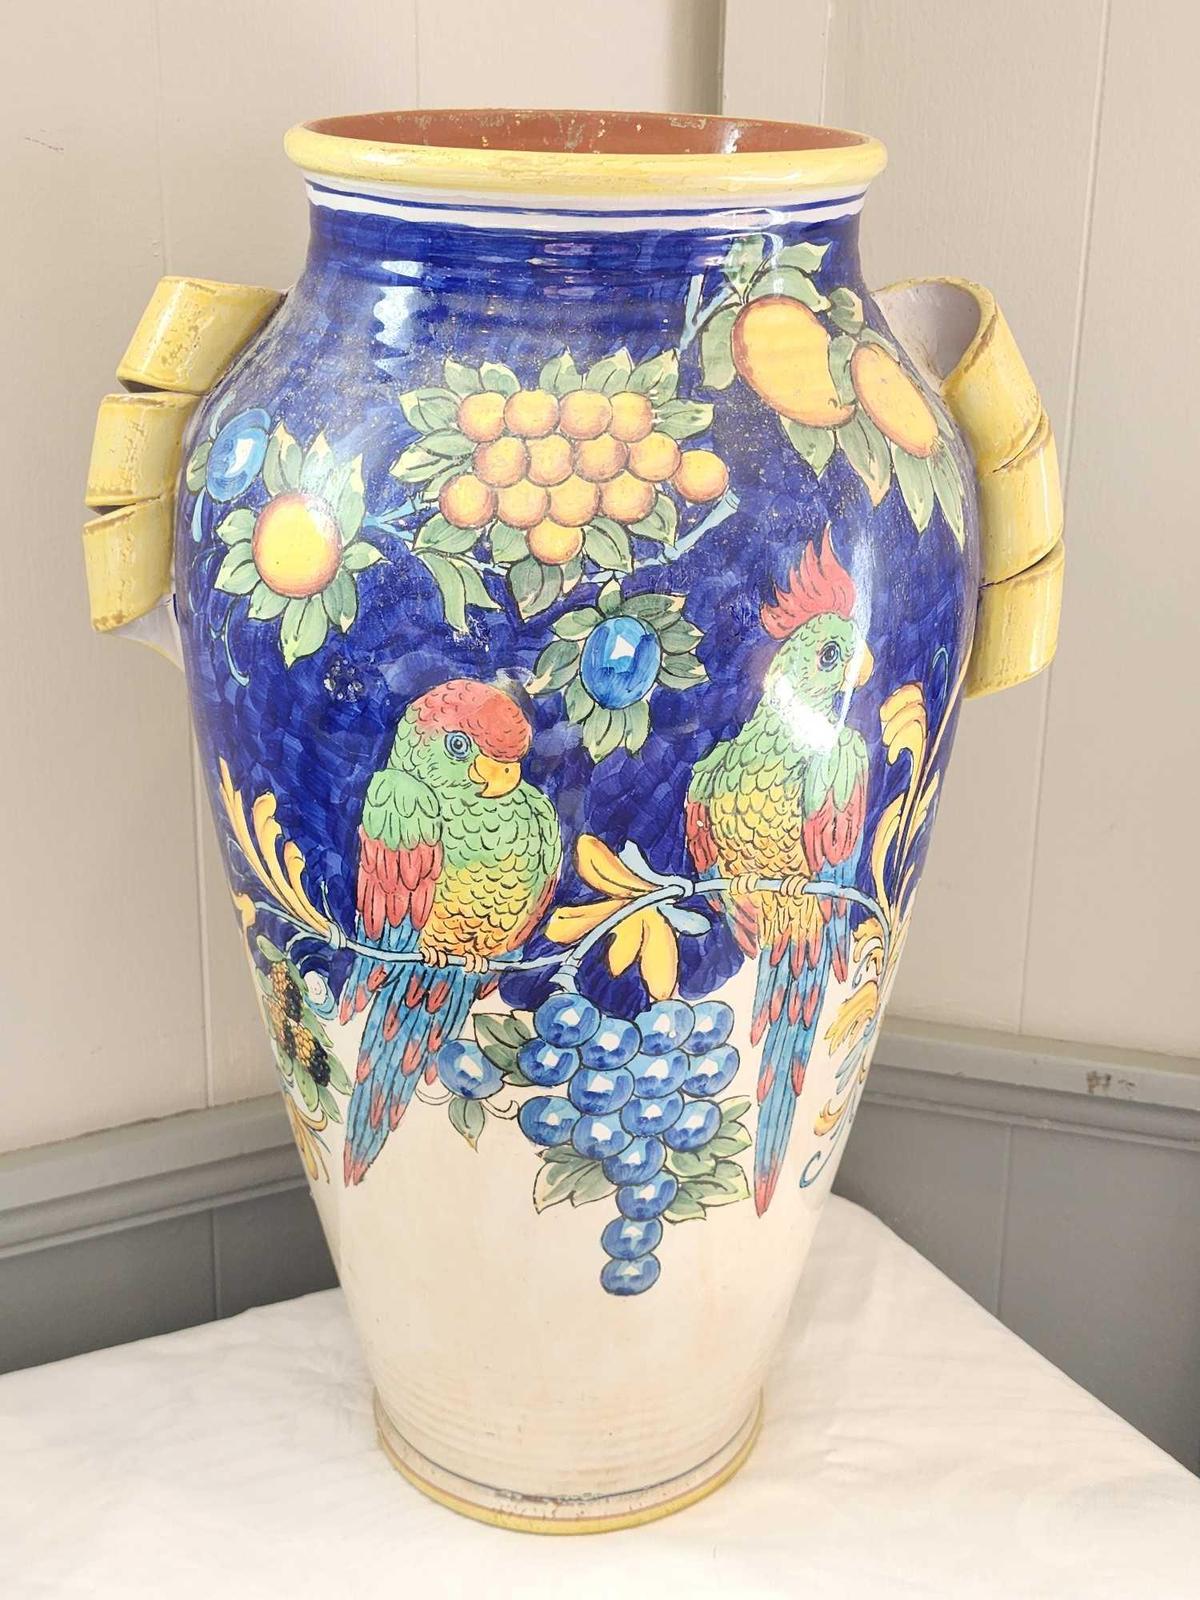 Chinese, Majolica style art pottery garden urn / vase with parrots